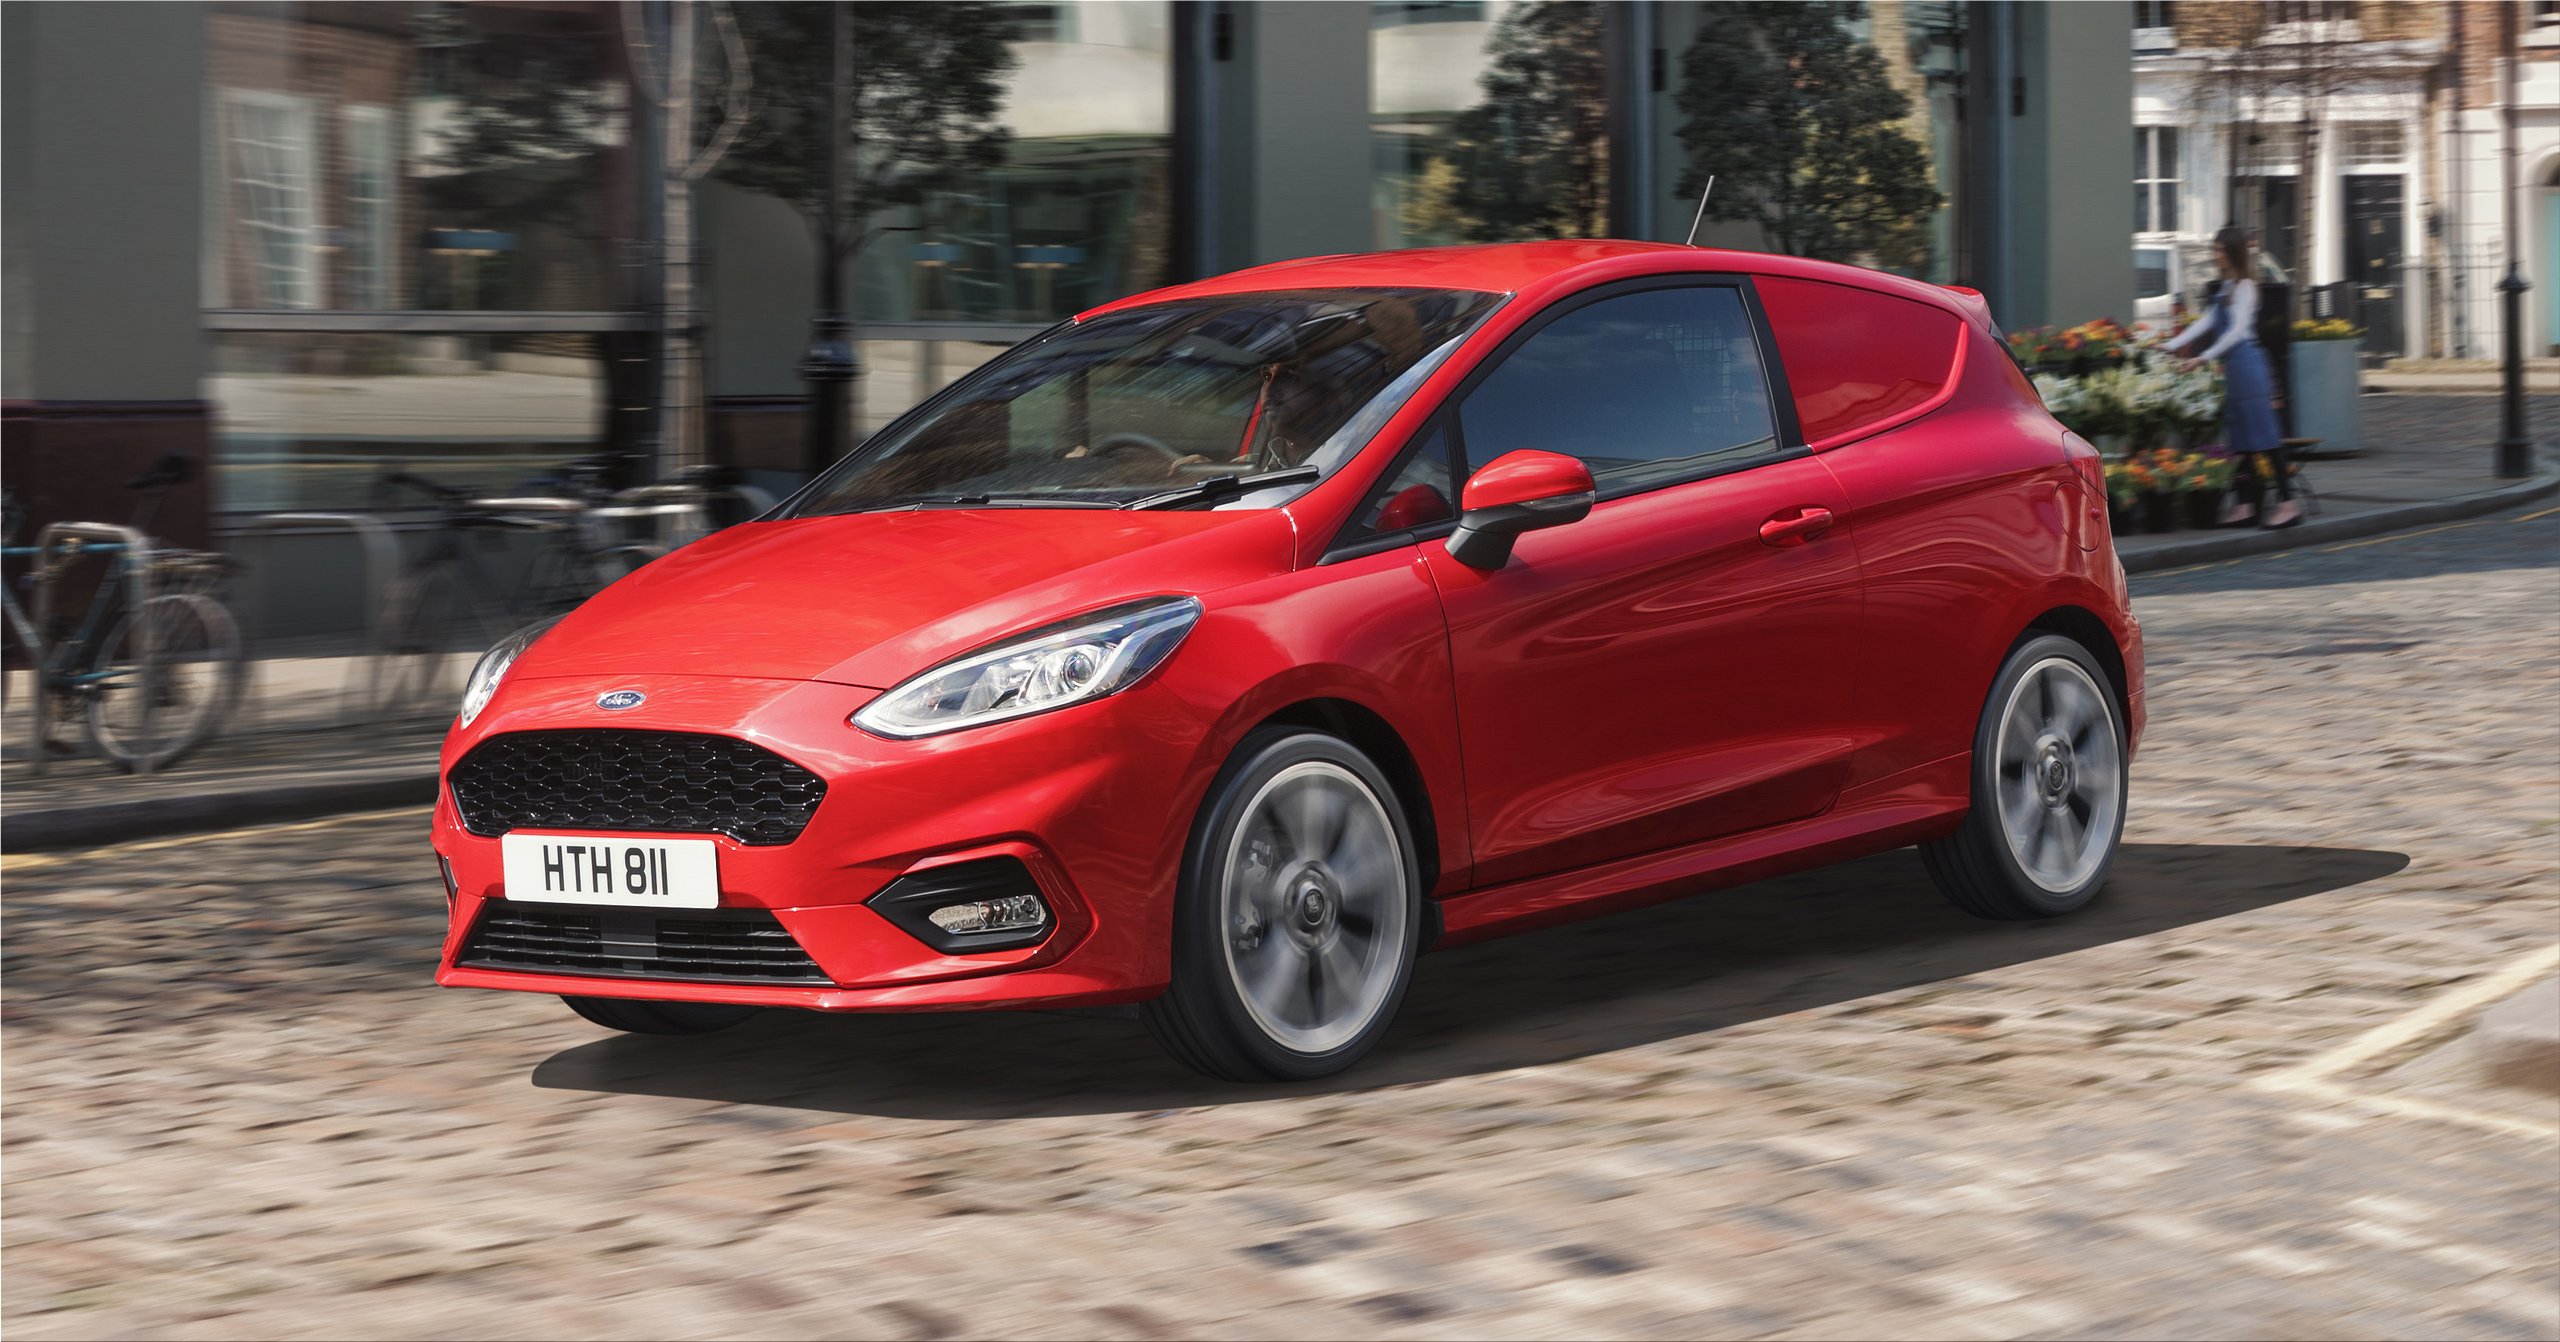 Ford Fiesta Van Ecoboost Hybrid Offers Superior Engine Performance And